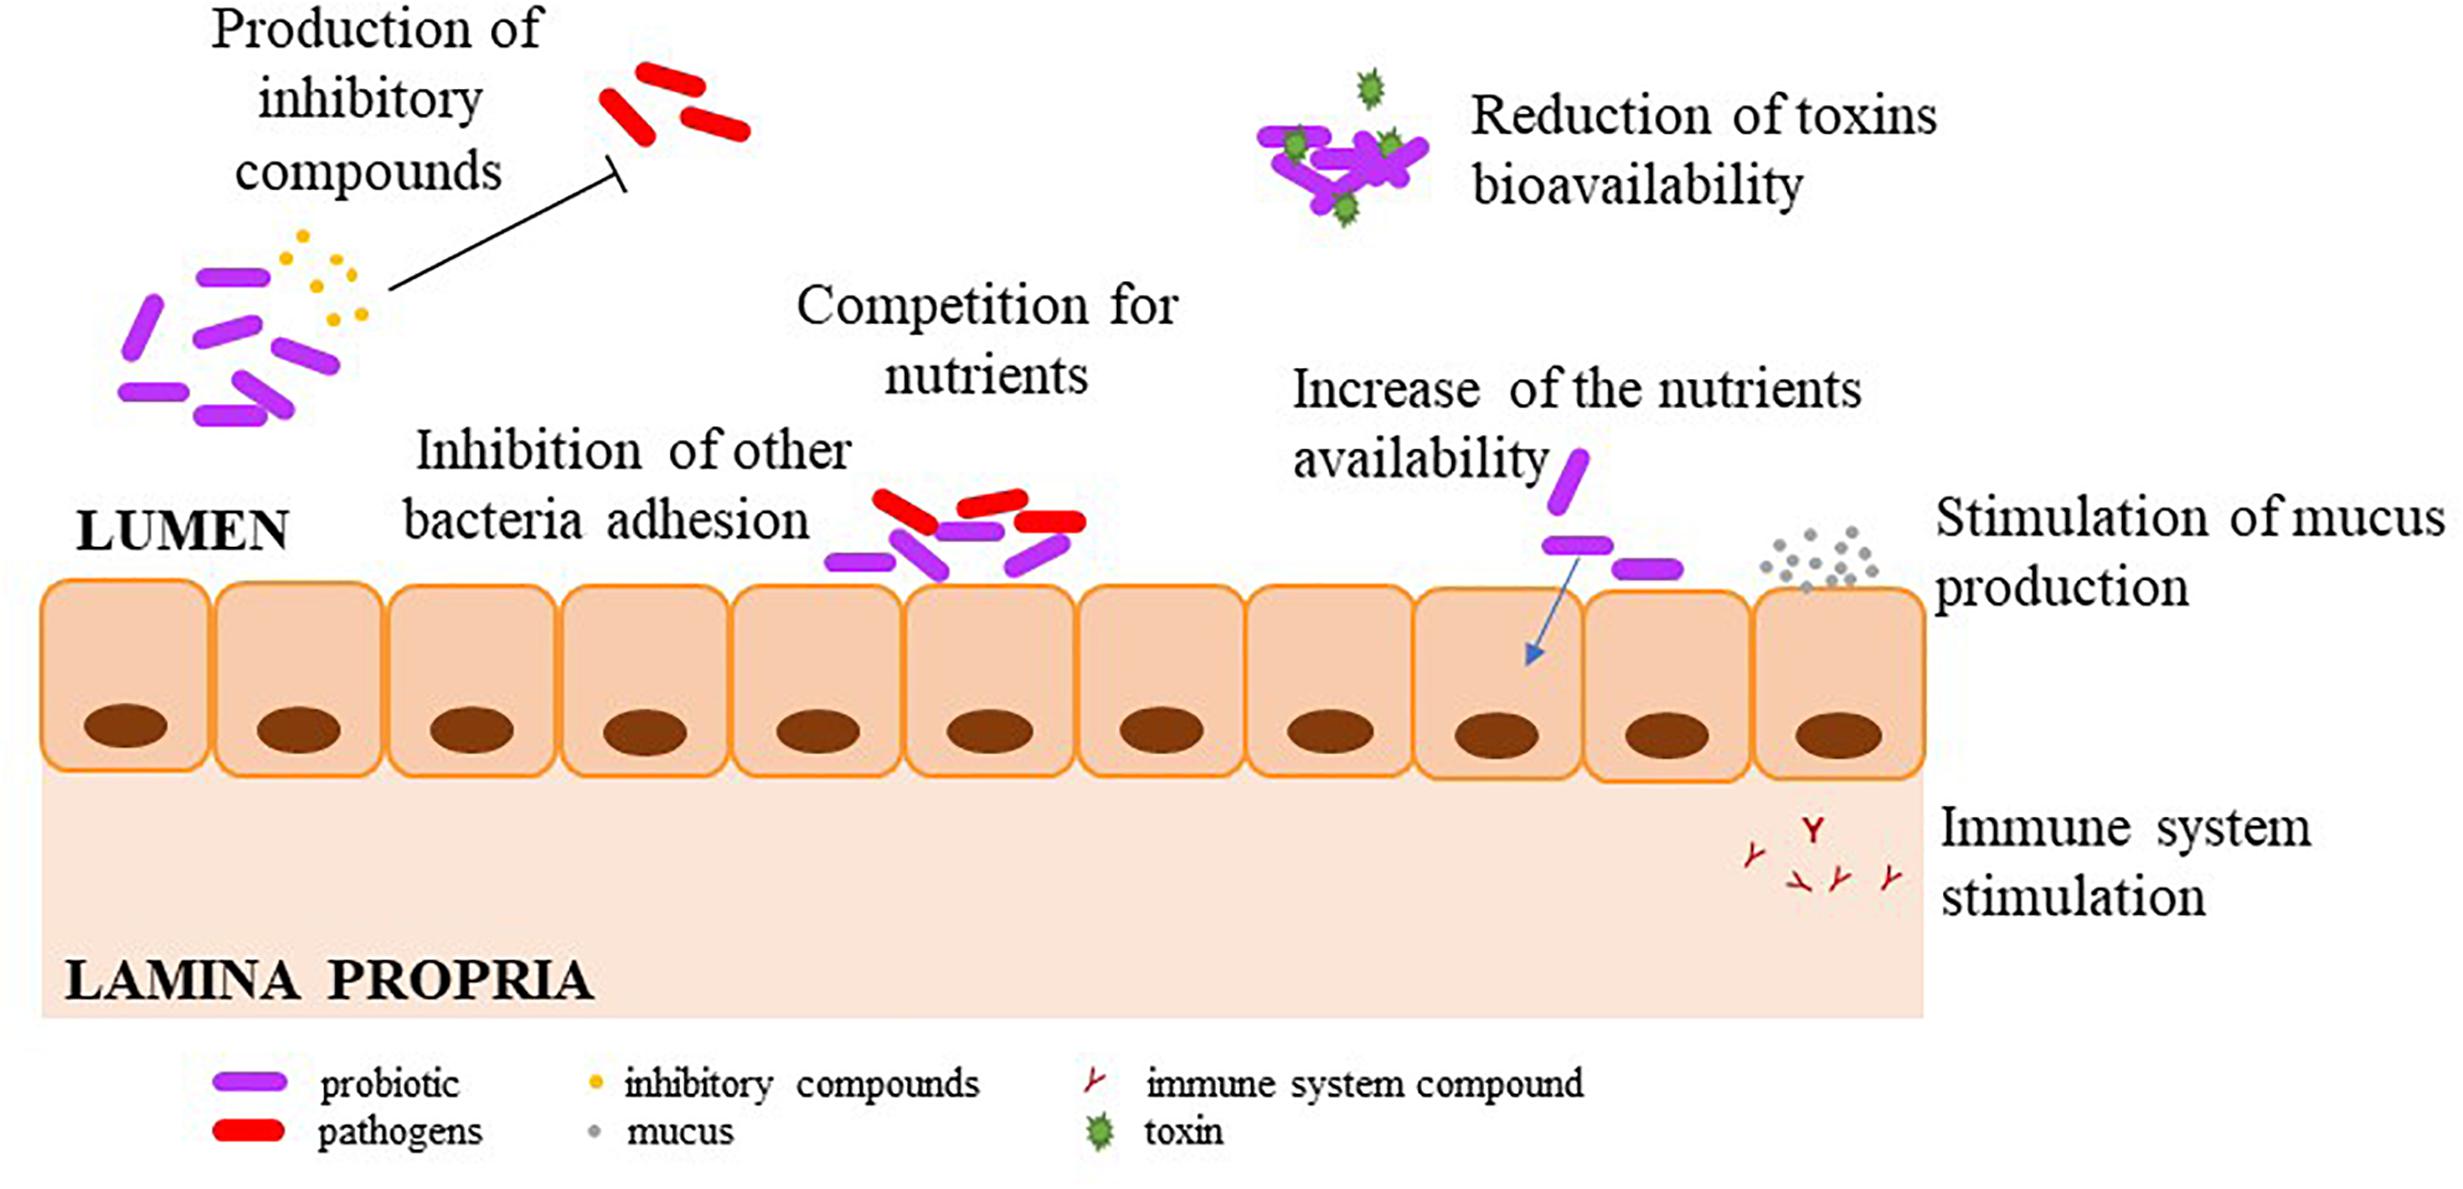 Frontiers Benefits And Inputs From Lactic Acid Bacteria And Their Bacteriocins As Alternatives To Antibiotic Growth Promoters During Food Animal Production Microbiology